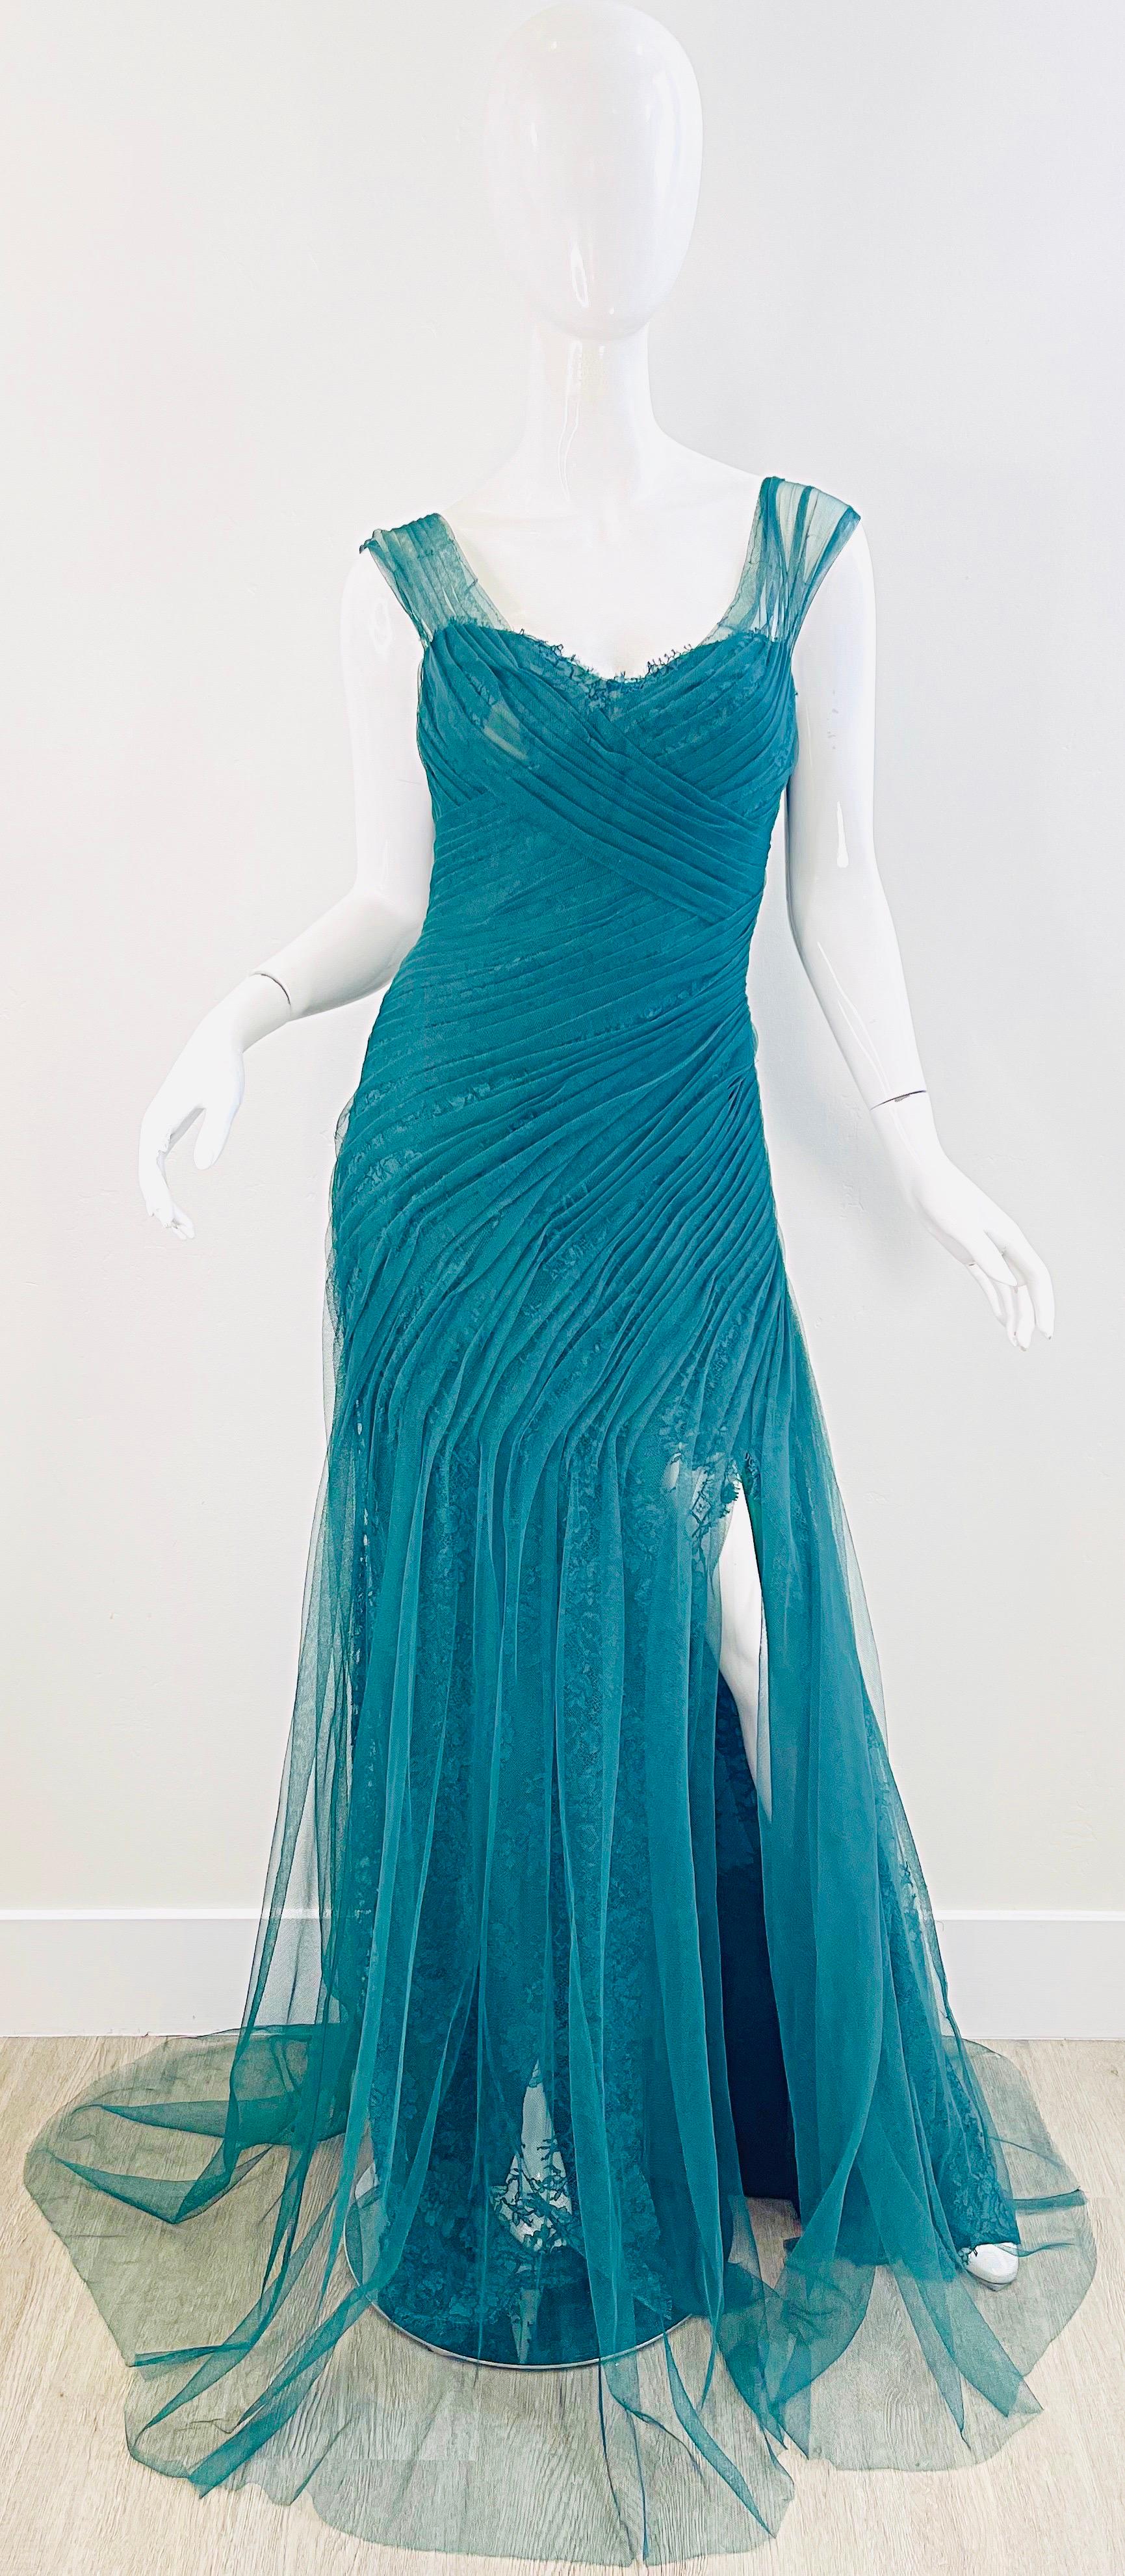 NWT Monique Lhuillier Runway Spring 2013 Size 4 Emerald Green Lace Gown Dress For Sale 13